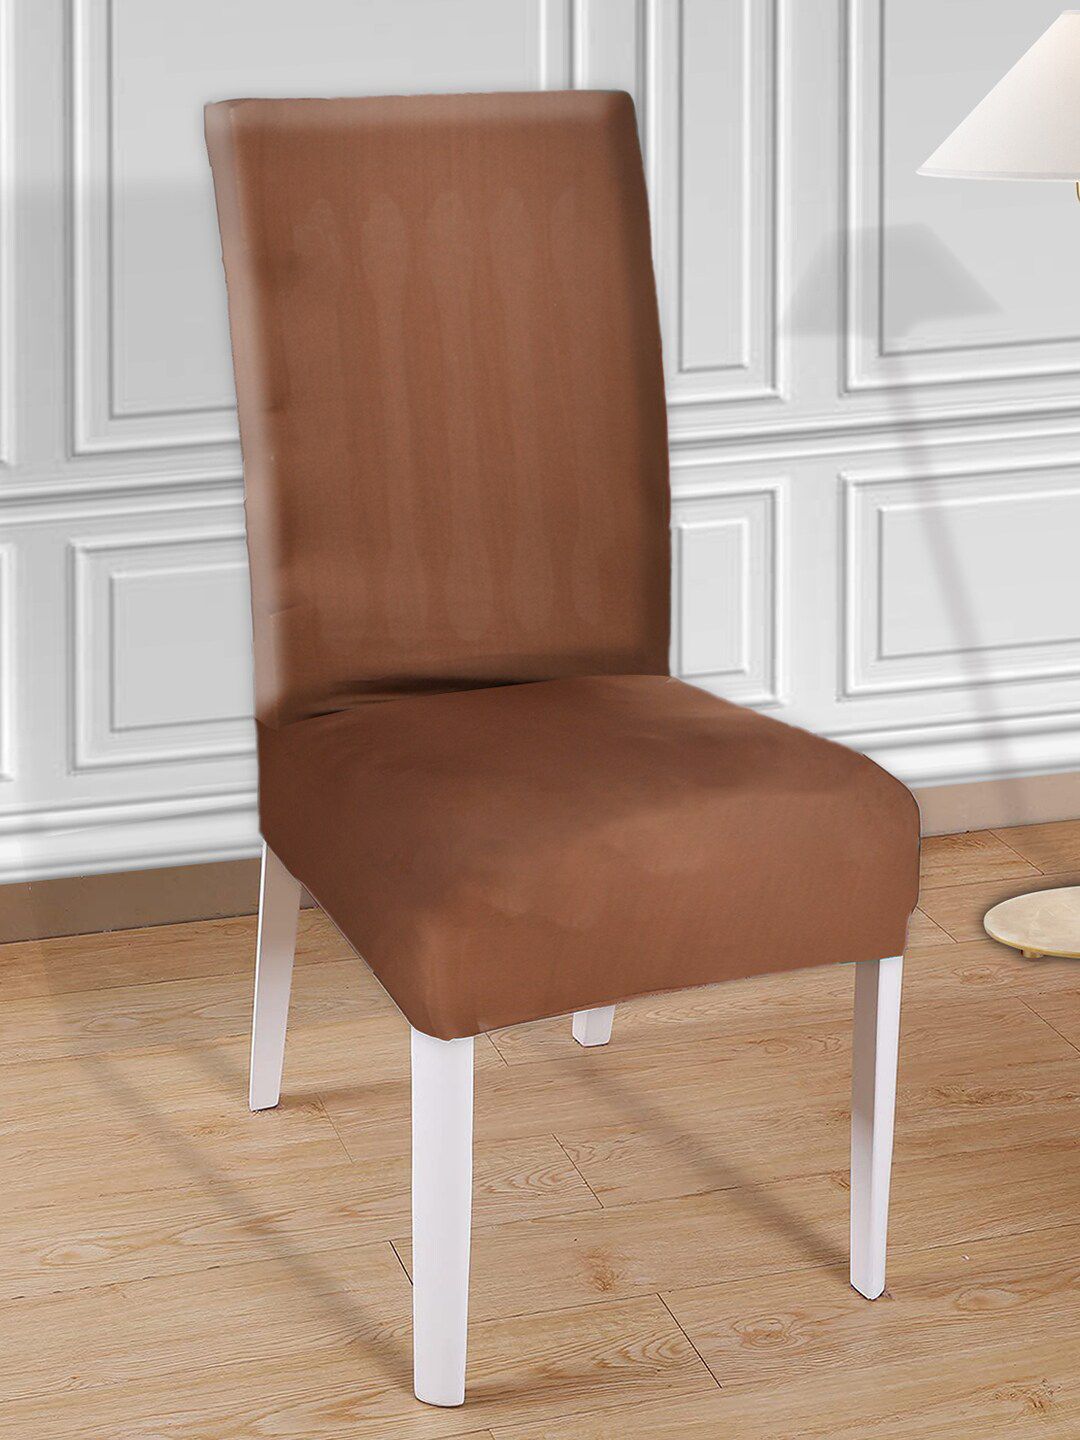 Kuber Industries Set Of 6 Brown Solid Chair Covers Price in India